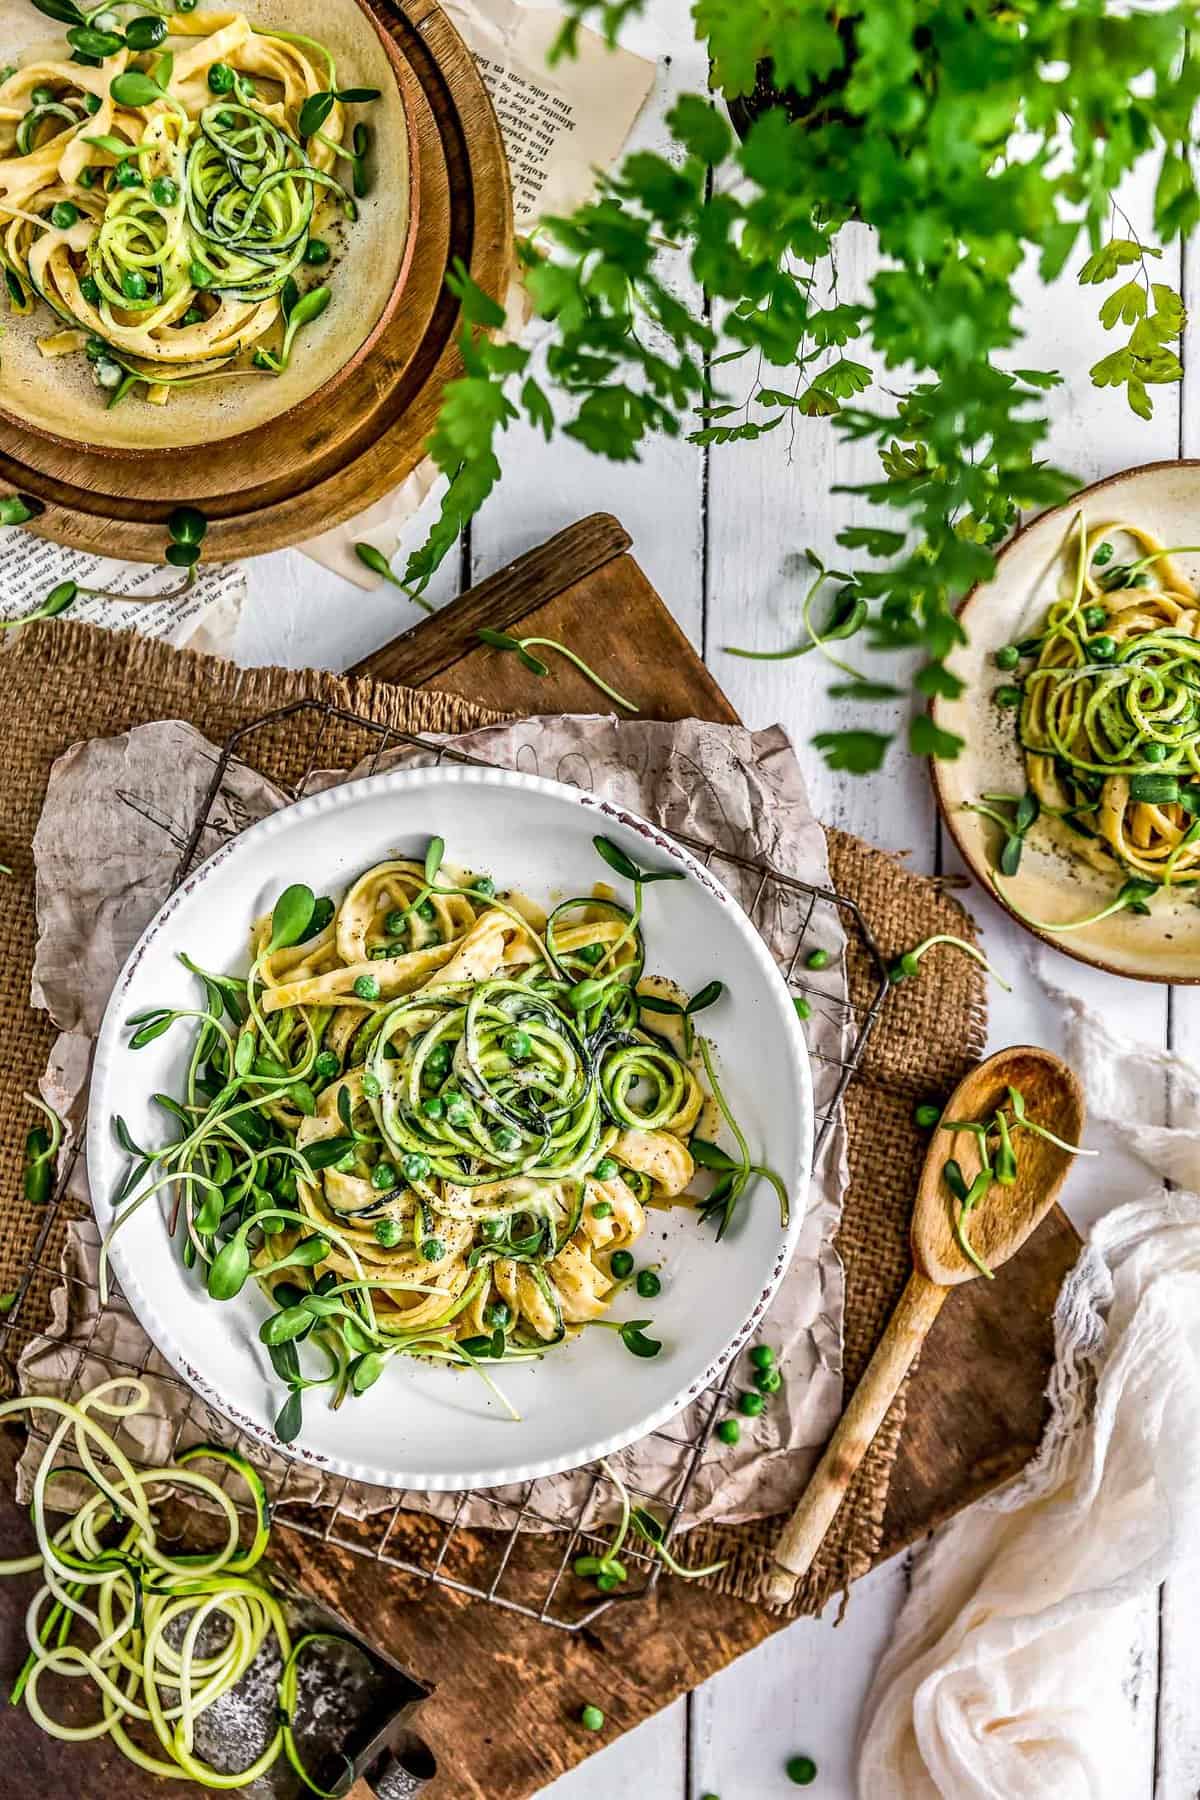 Tablescape of Vegan Cashew Alfredo Sauce with pasta